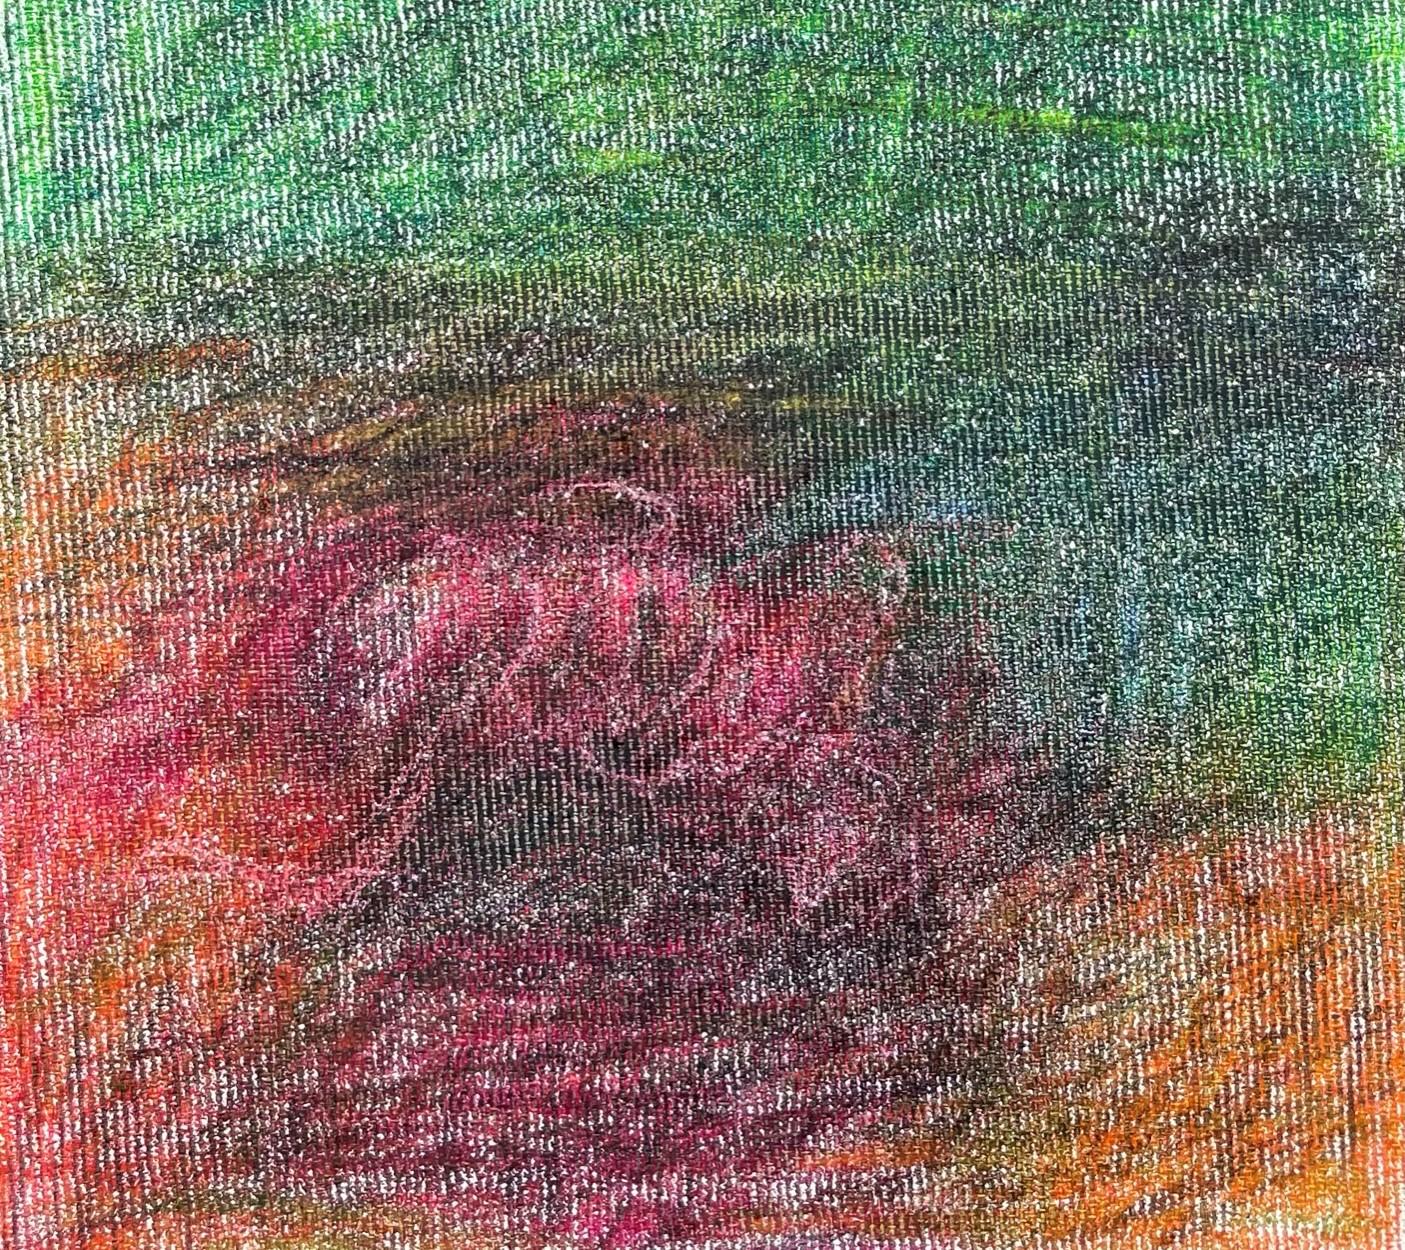 Body in the Field #4 - Green, Red, Drawing, Color pencil - Expressionist Art by Zsolt Berszán